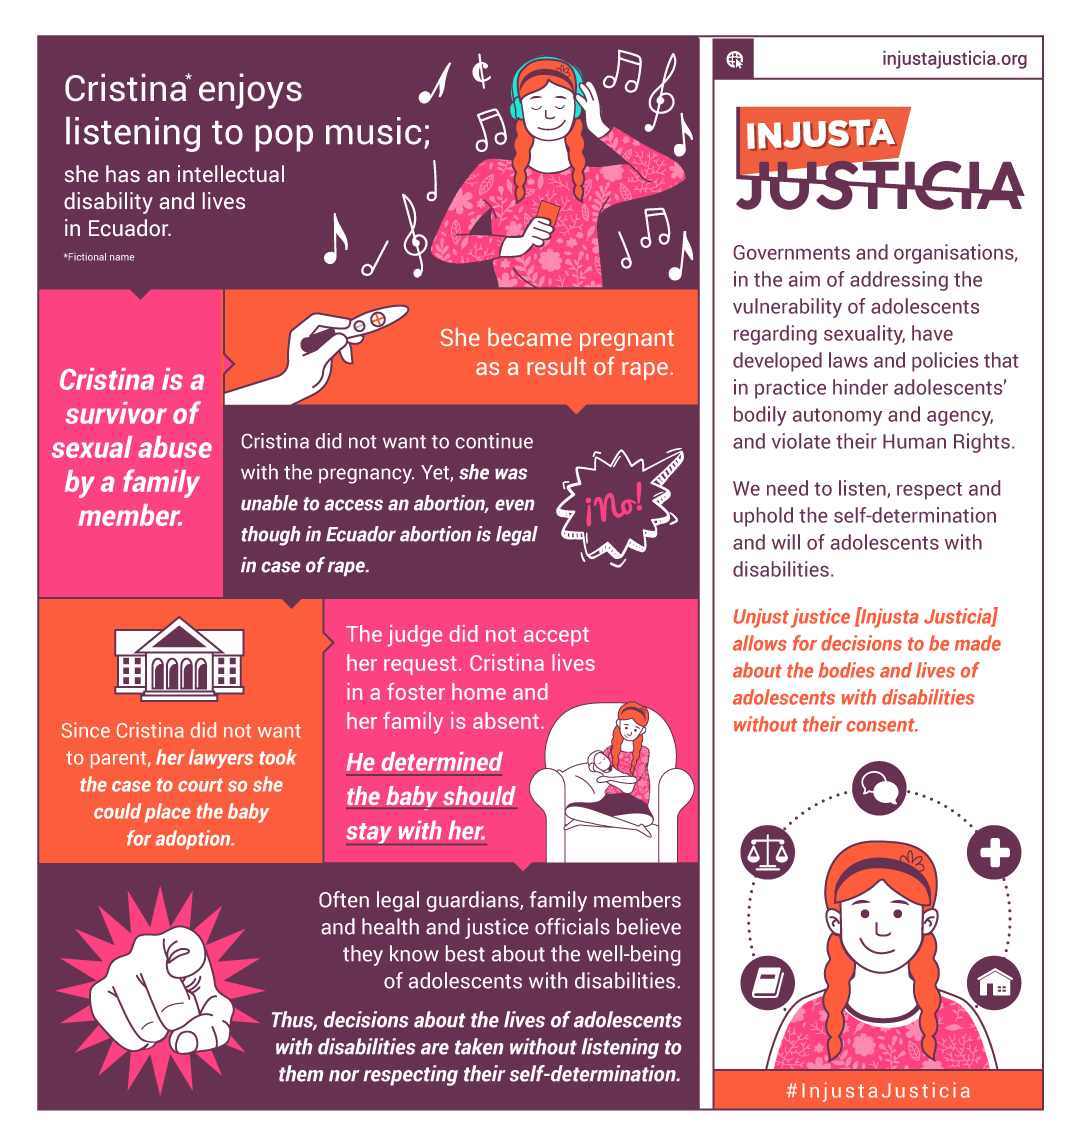 Infographic about Cristina's case, which is explained below. Full description available for download.